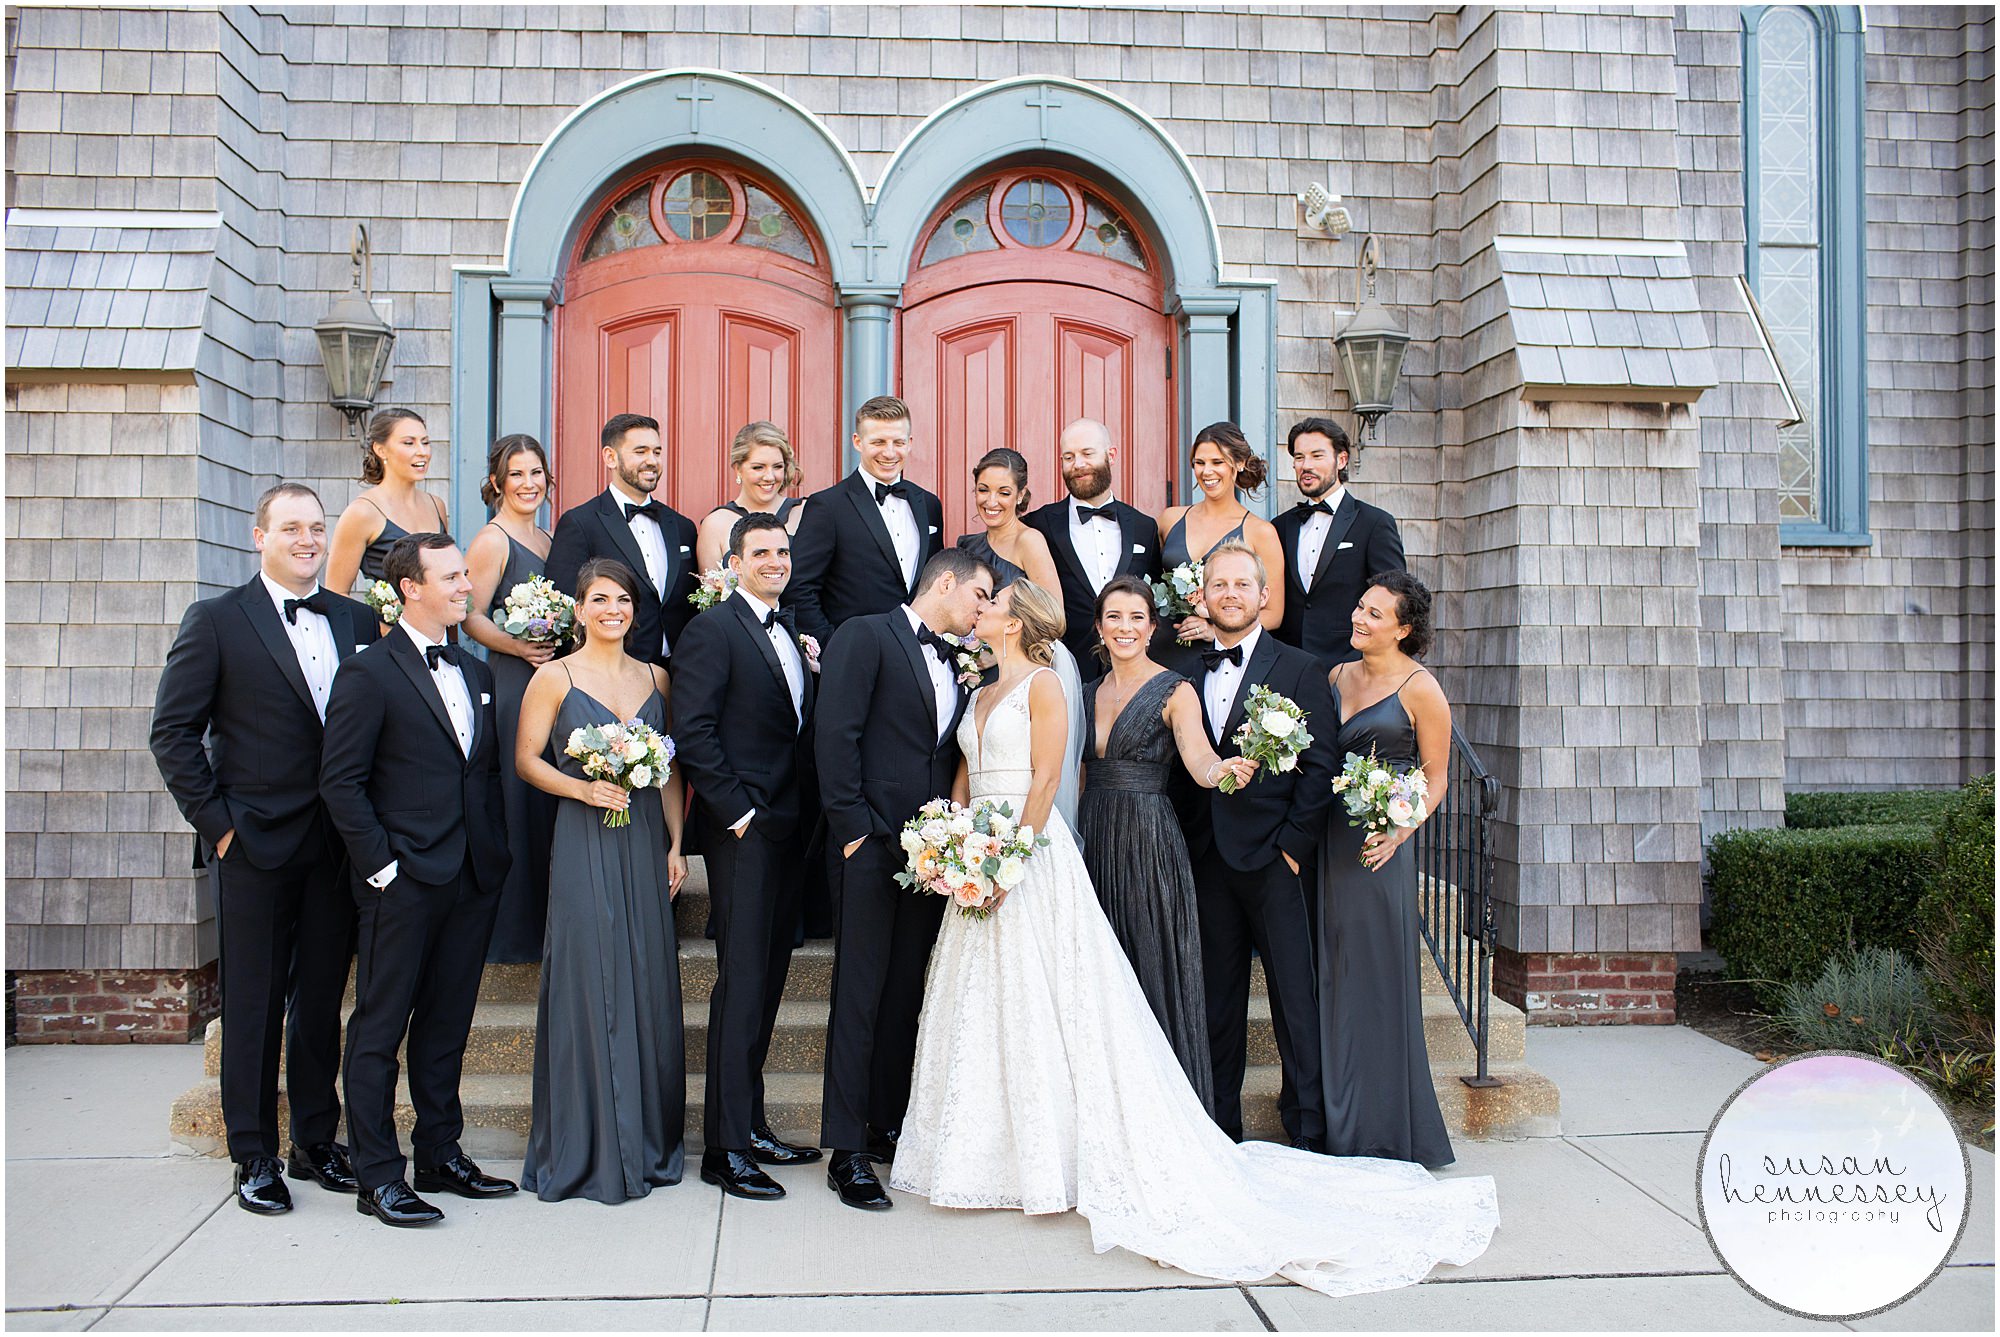 Bridal party at church in Rumson, NJ